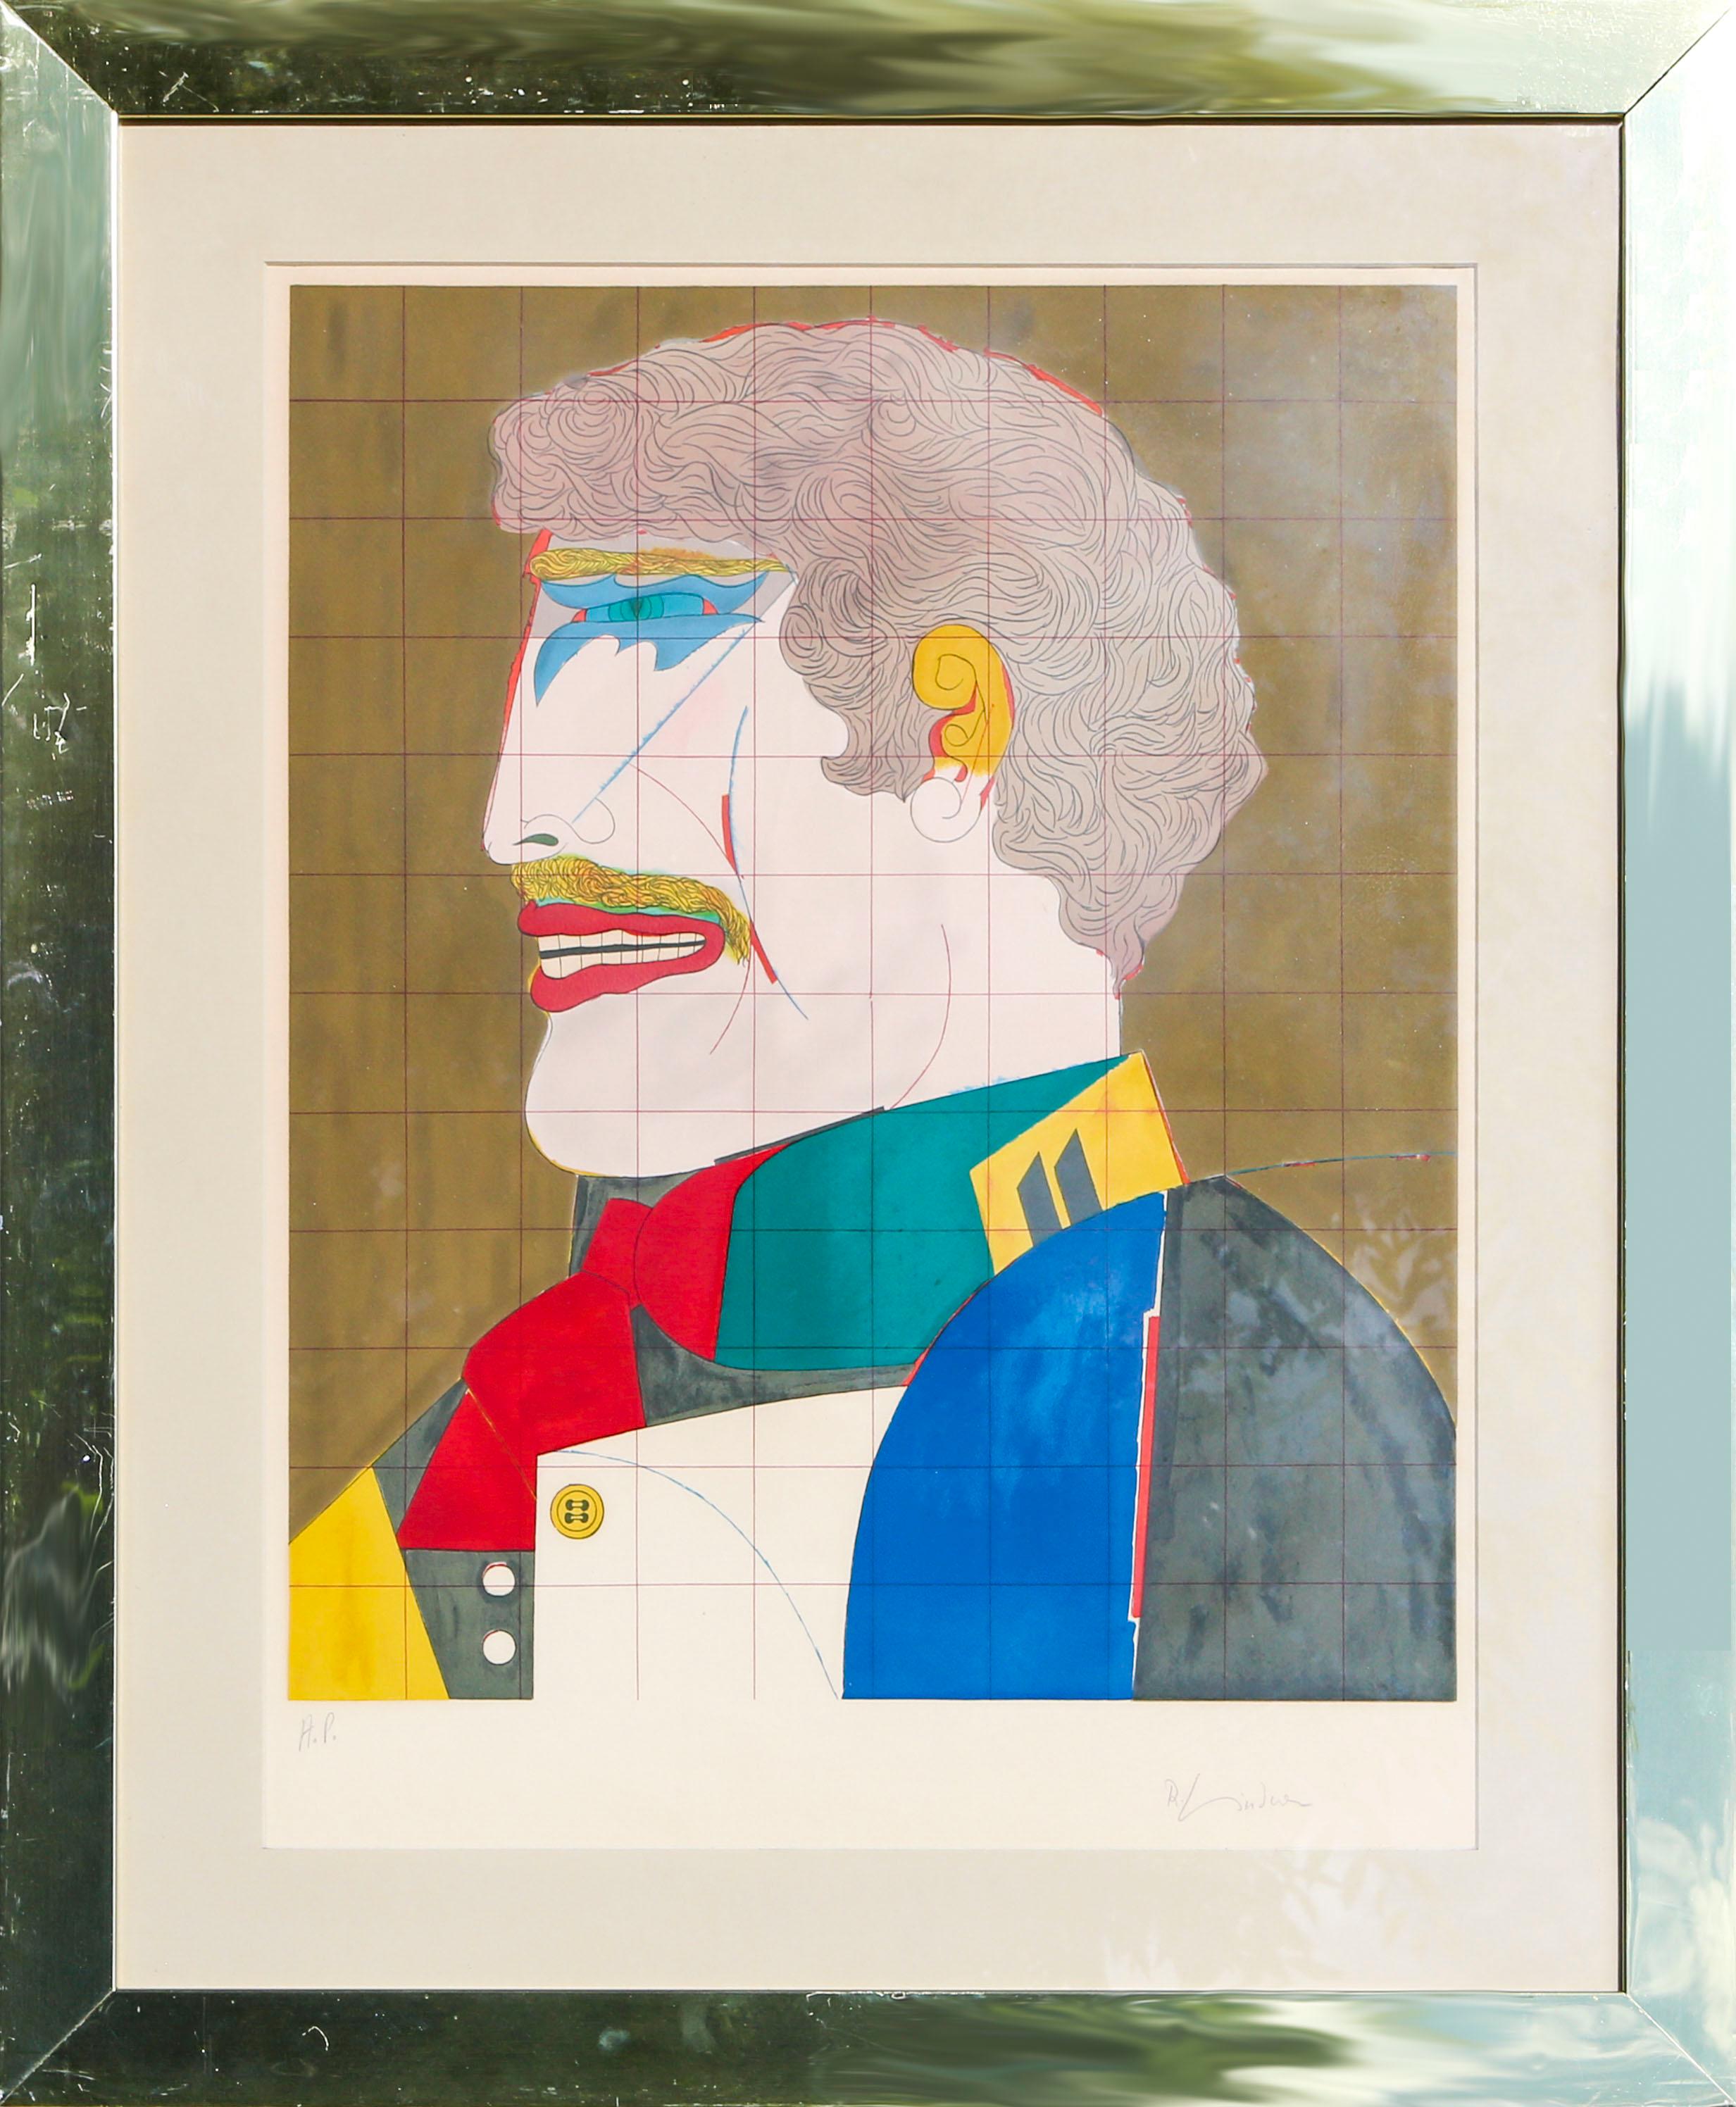 From the 8-piece portfolio "After Noon" by Richard Lindner. This series of bright Pop Art prints each depicted a figure in profile in Lindner's signature style. This piece comes from one of the 15 Artist's Proofs prints and is signed and numbered in